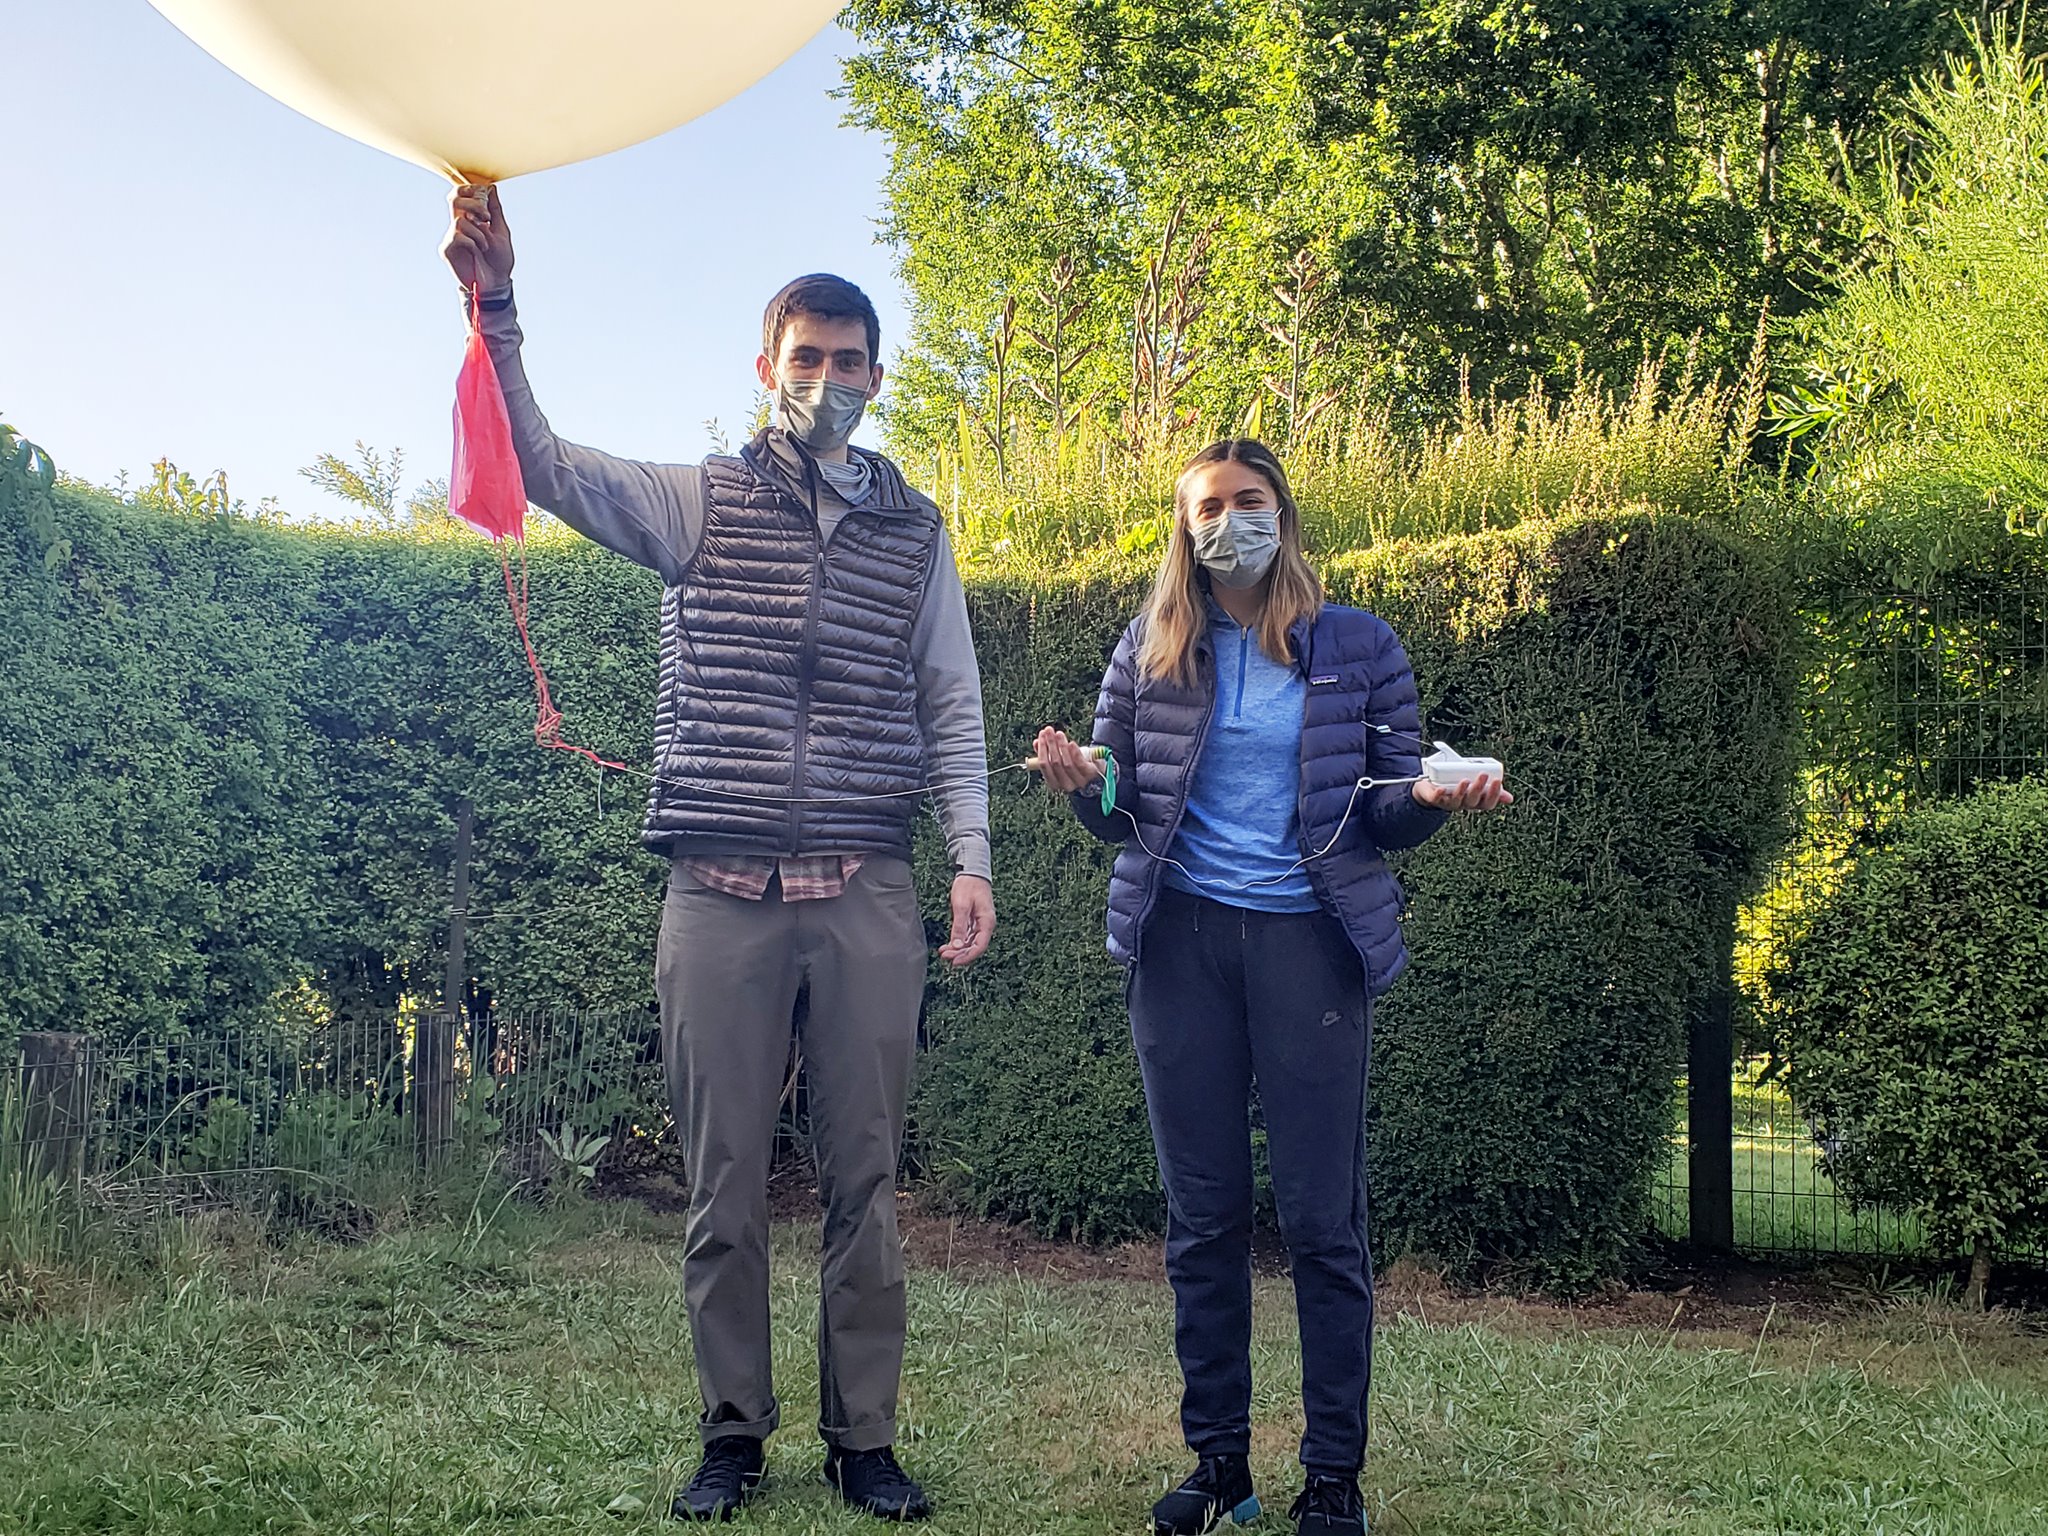 Two students in Chile, one holding a balloon and one holding a radiosonde